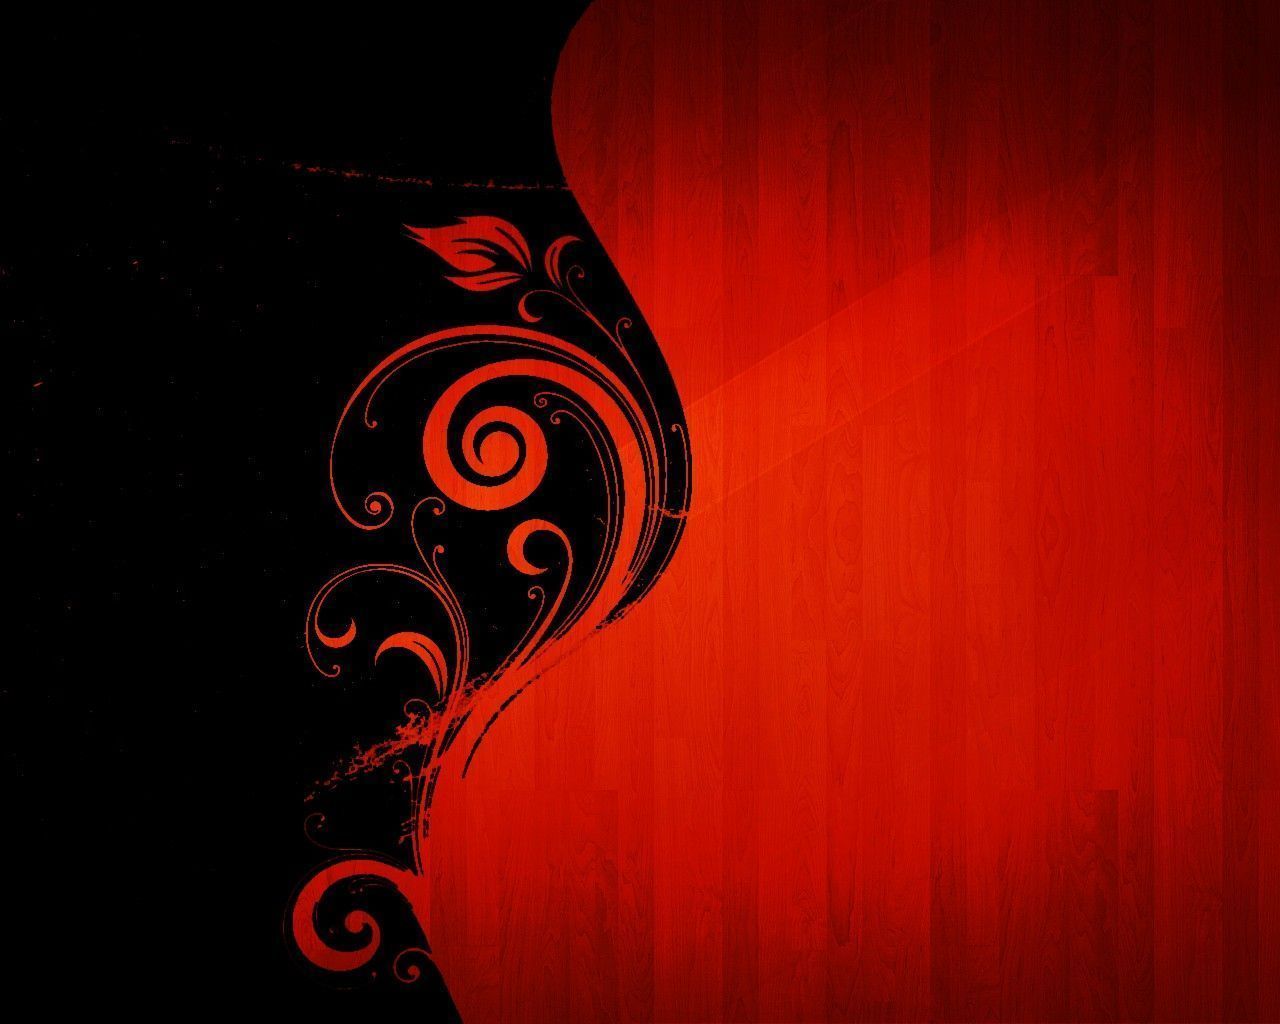 Abstract Red Hd Wallpapers Wallpaper Cave